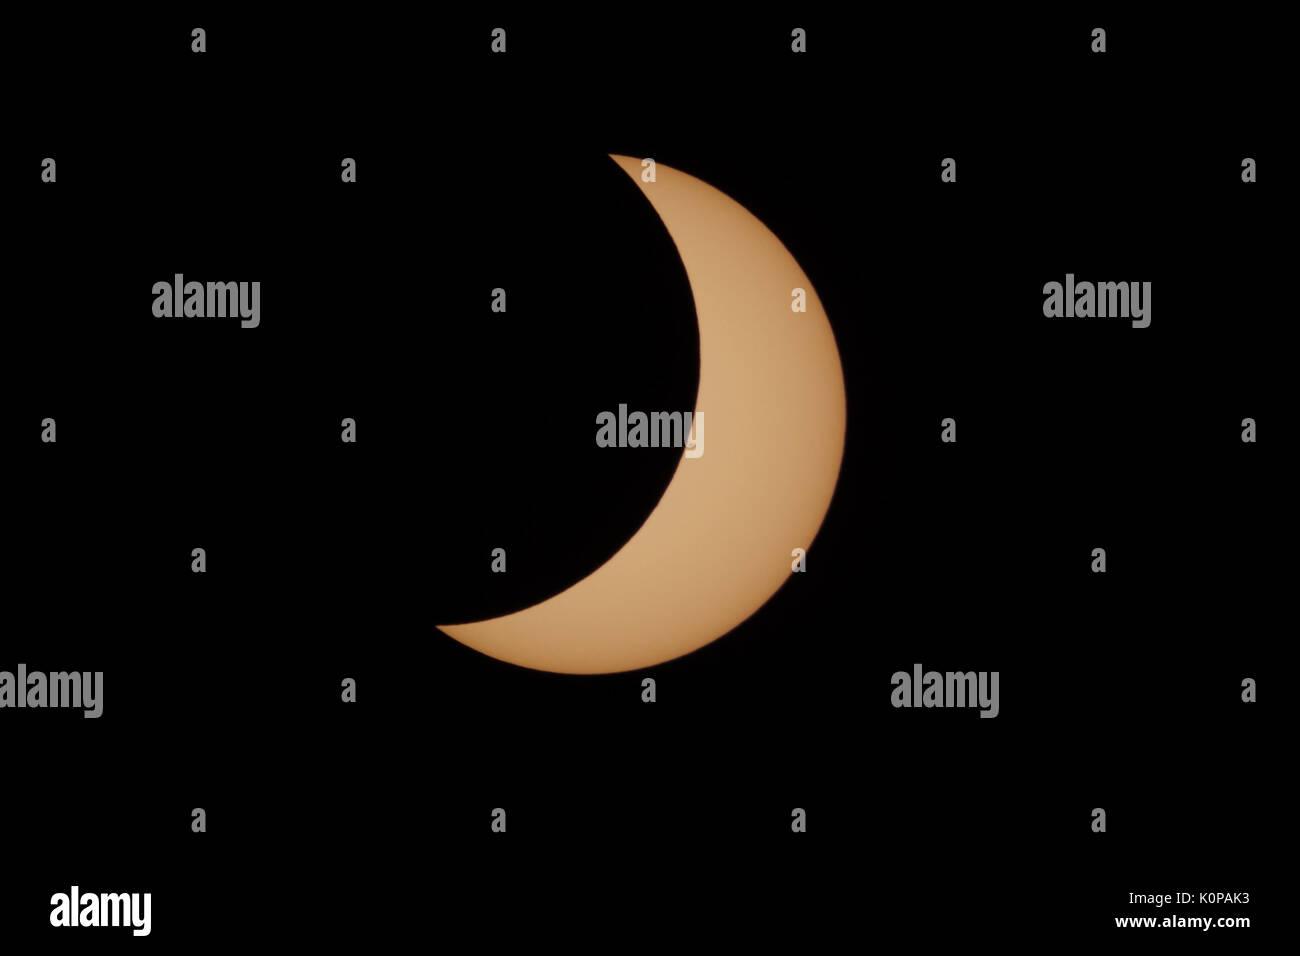 A crescent Sun is visible in the second partial eclipse phase of the Great American Eclipse on August 21, 2017. Stock Photo